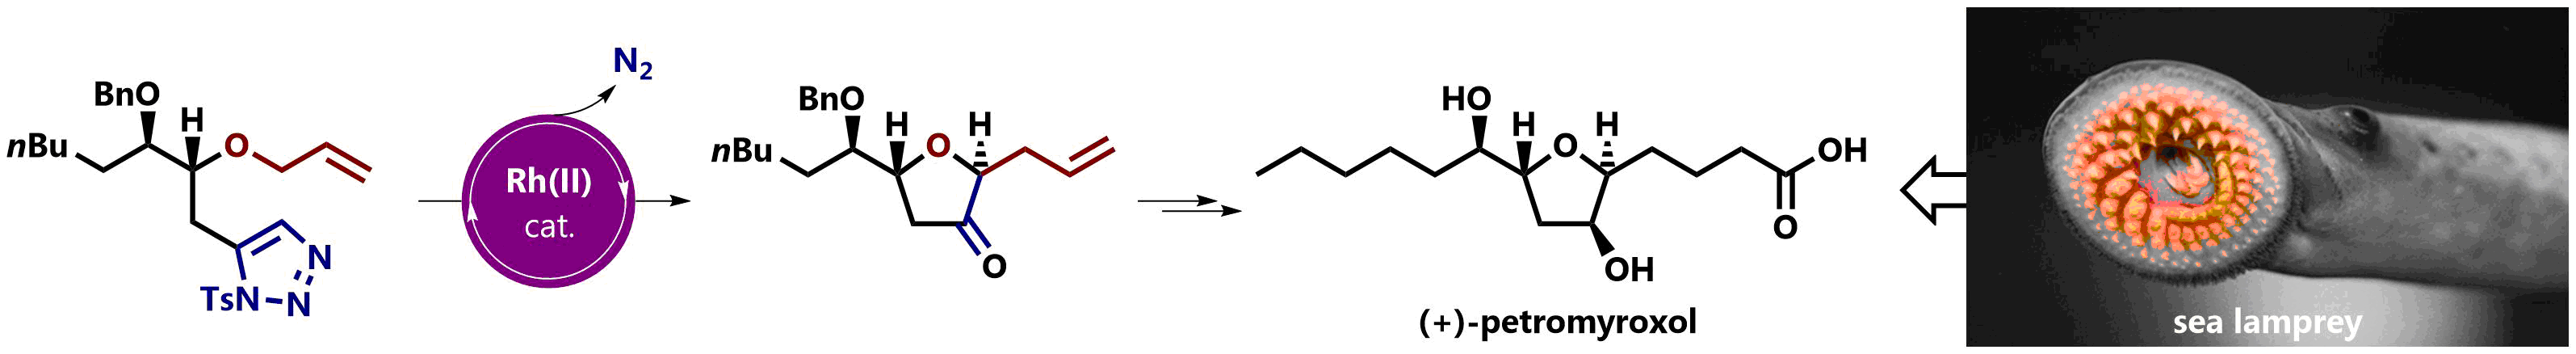 Abstract image for Enantioselective Synthesis of (+)-Petromyroxol, Enabled by Rhodium-Catalyzed Denitrogenation and Rearrangement of a 1-Sulfonyl-1,2,3-Triazole